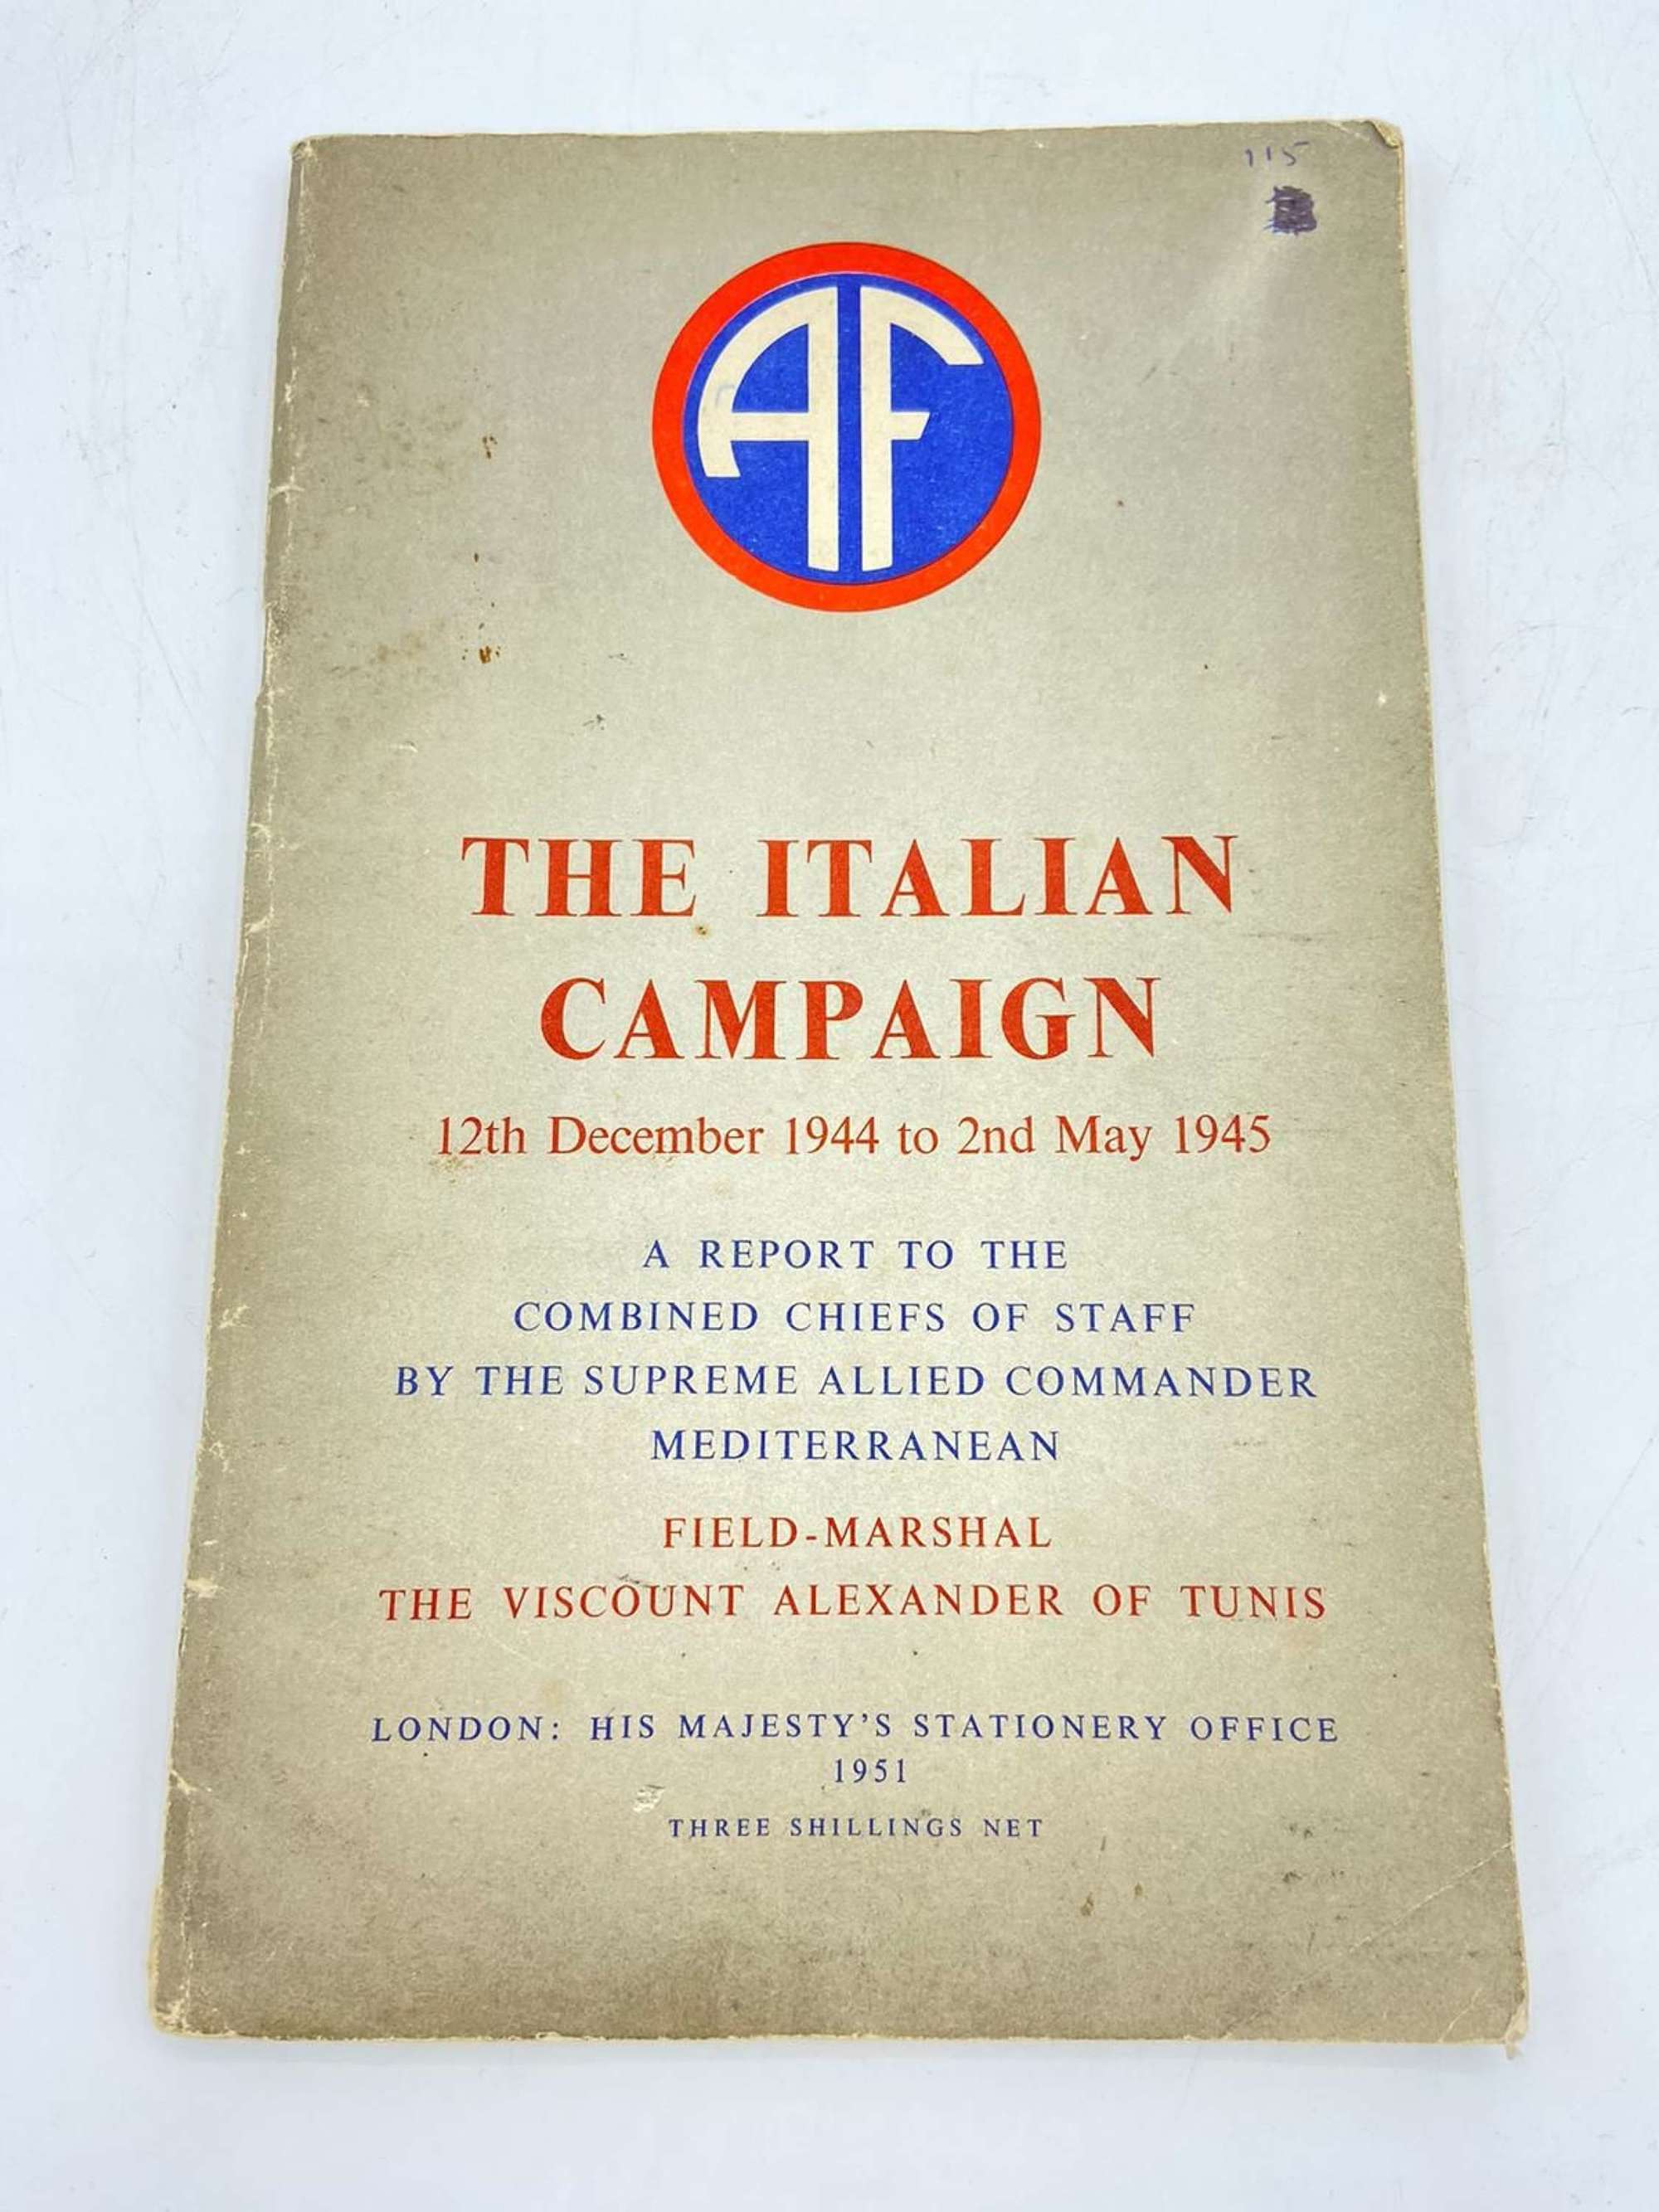 WW2 Italian Campaign 1944 - 1945 Report By Combined Cheif Of Staff